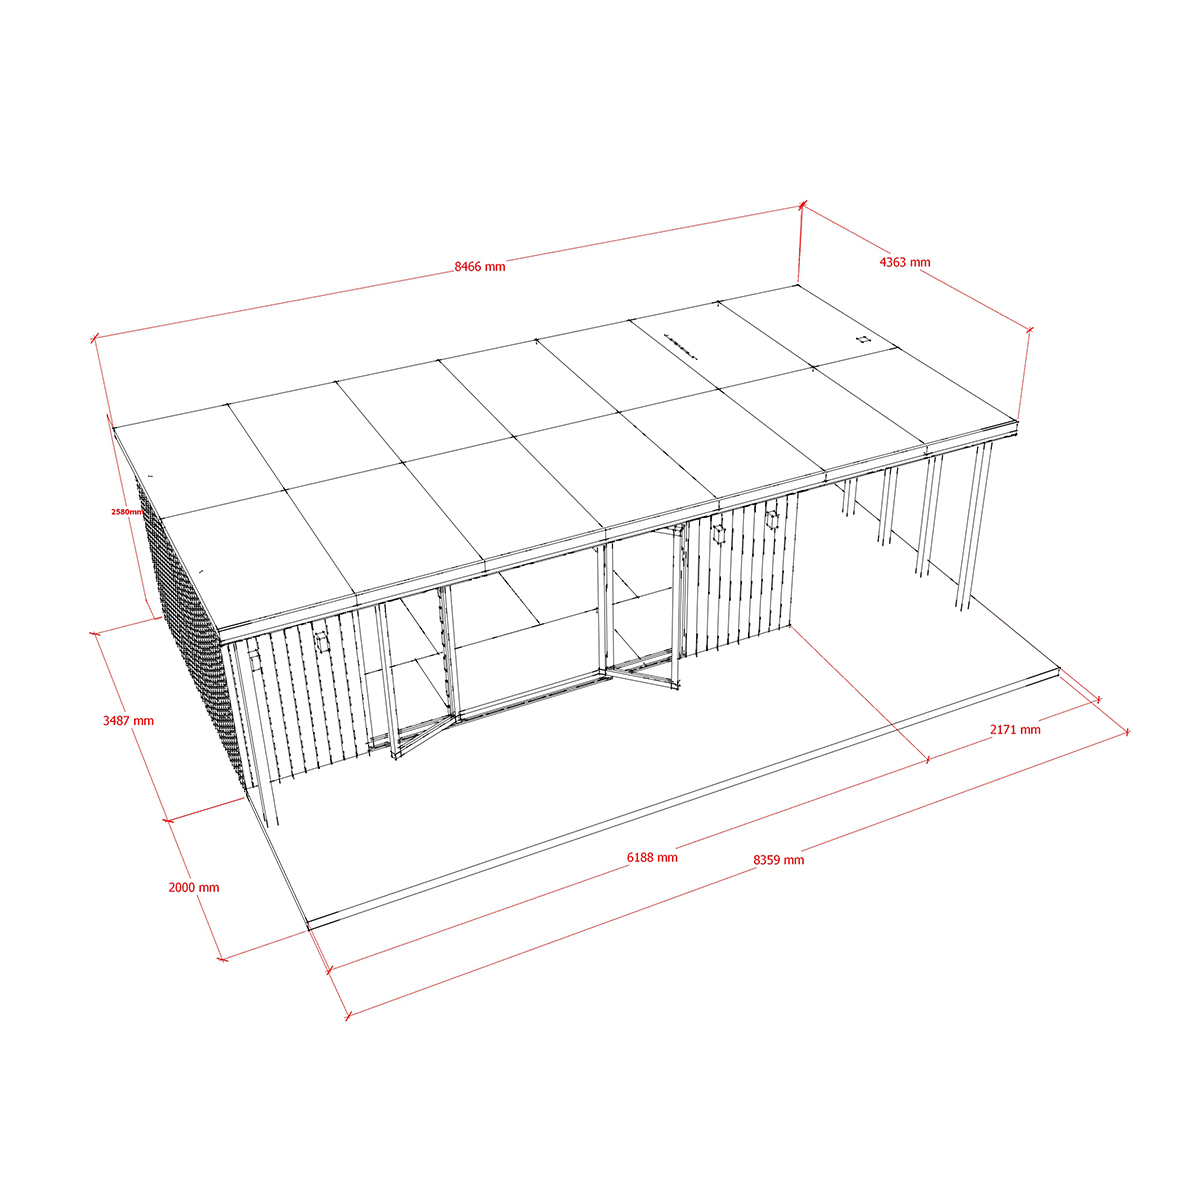 Exterior dimensions of bespoke summerhouse with roof overhang